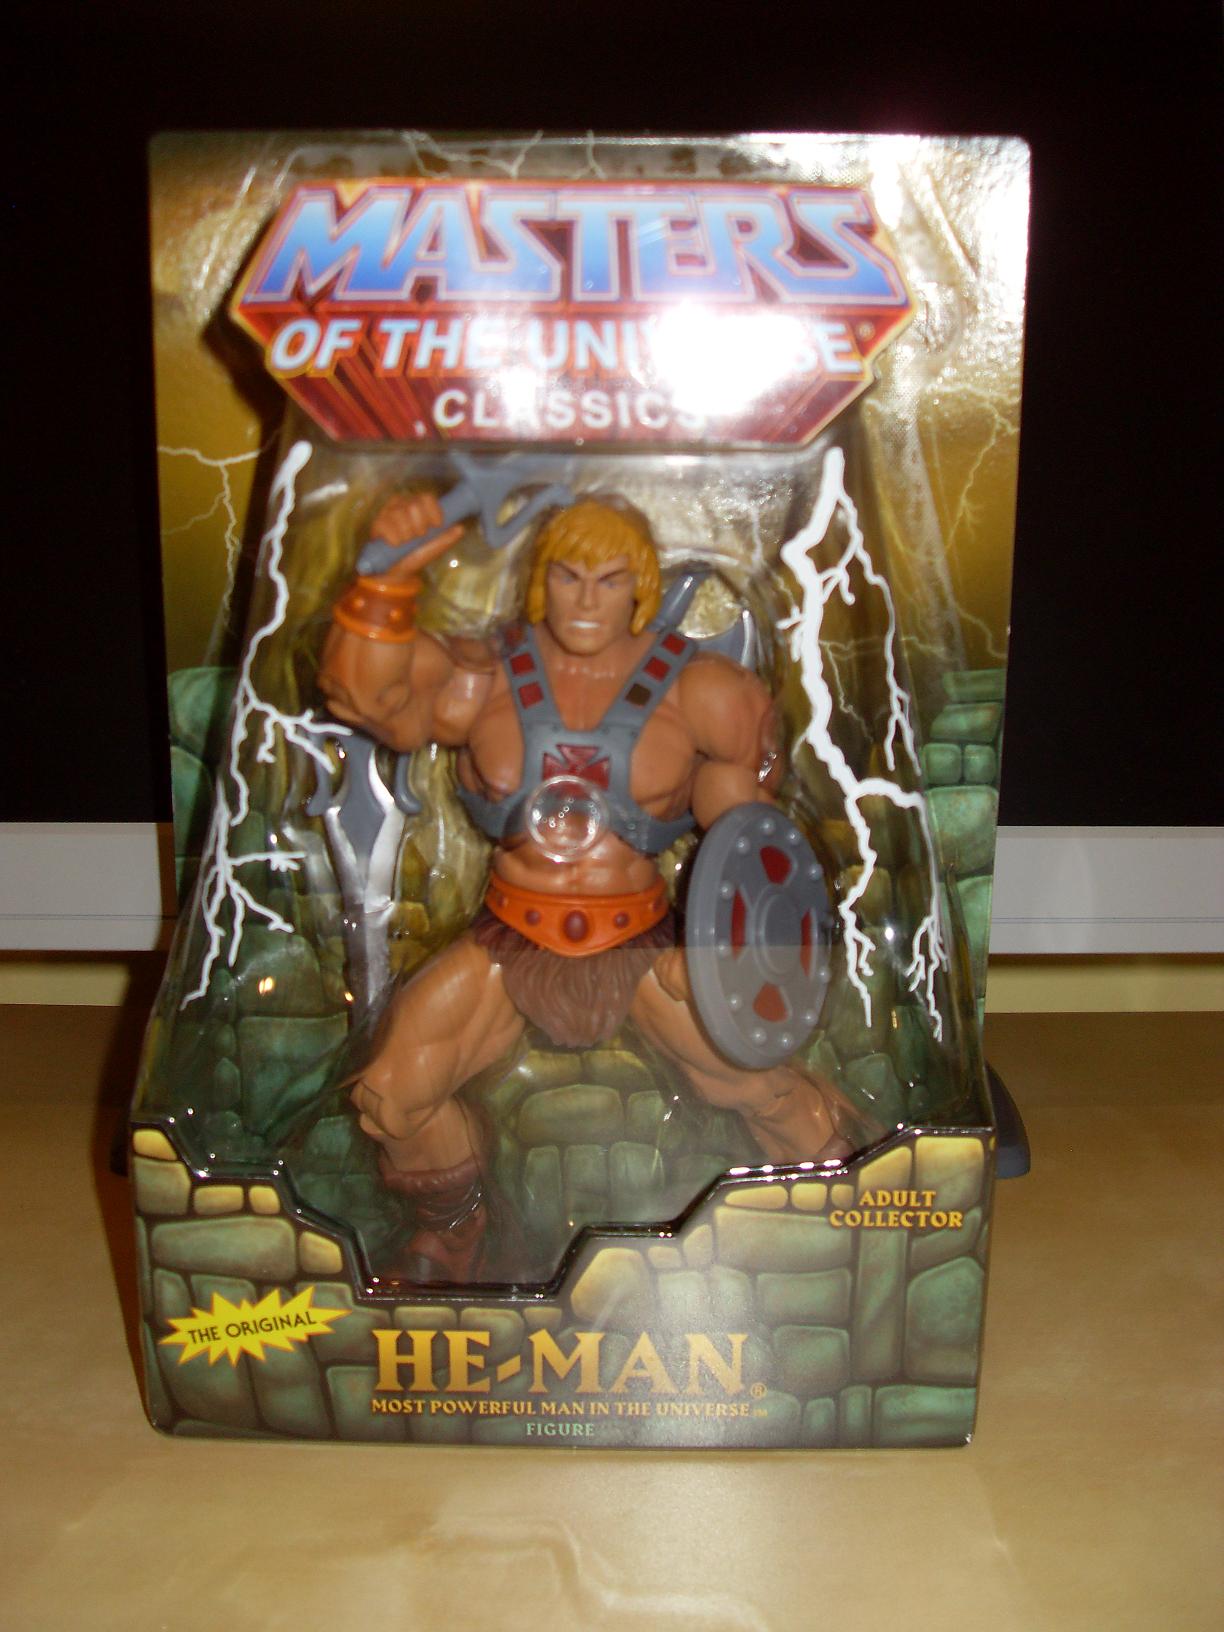 LORD HE-MAN Colecction 7888